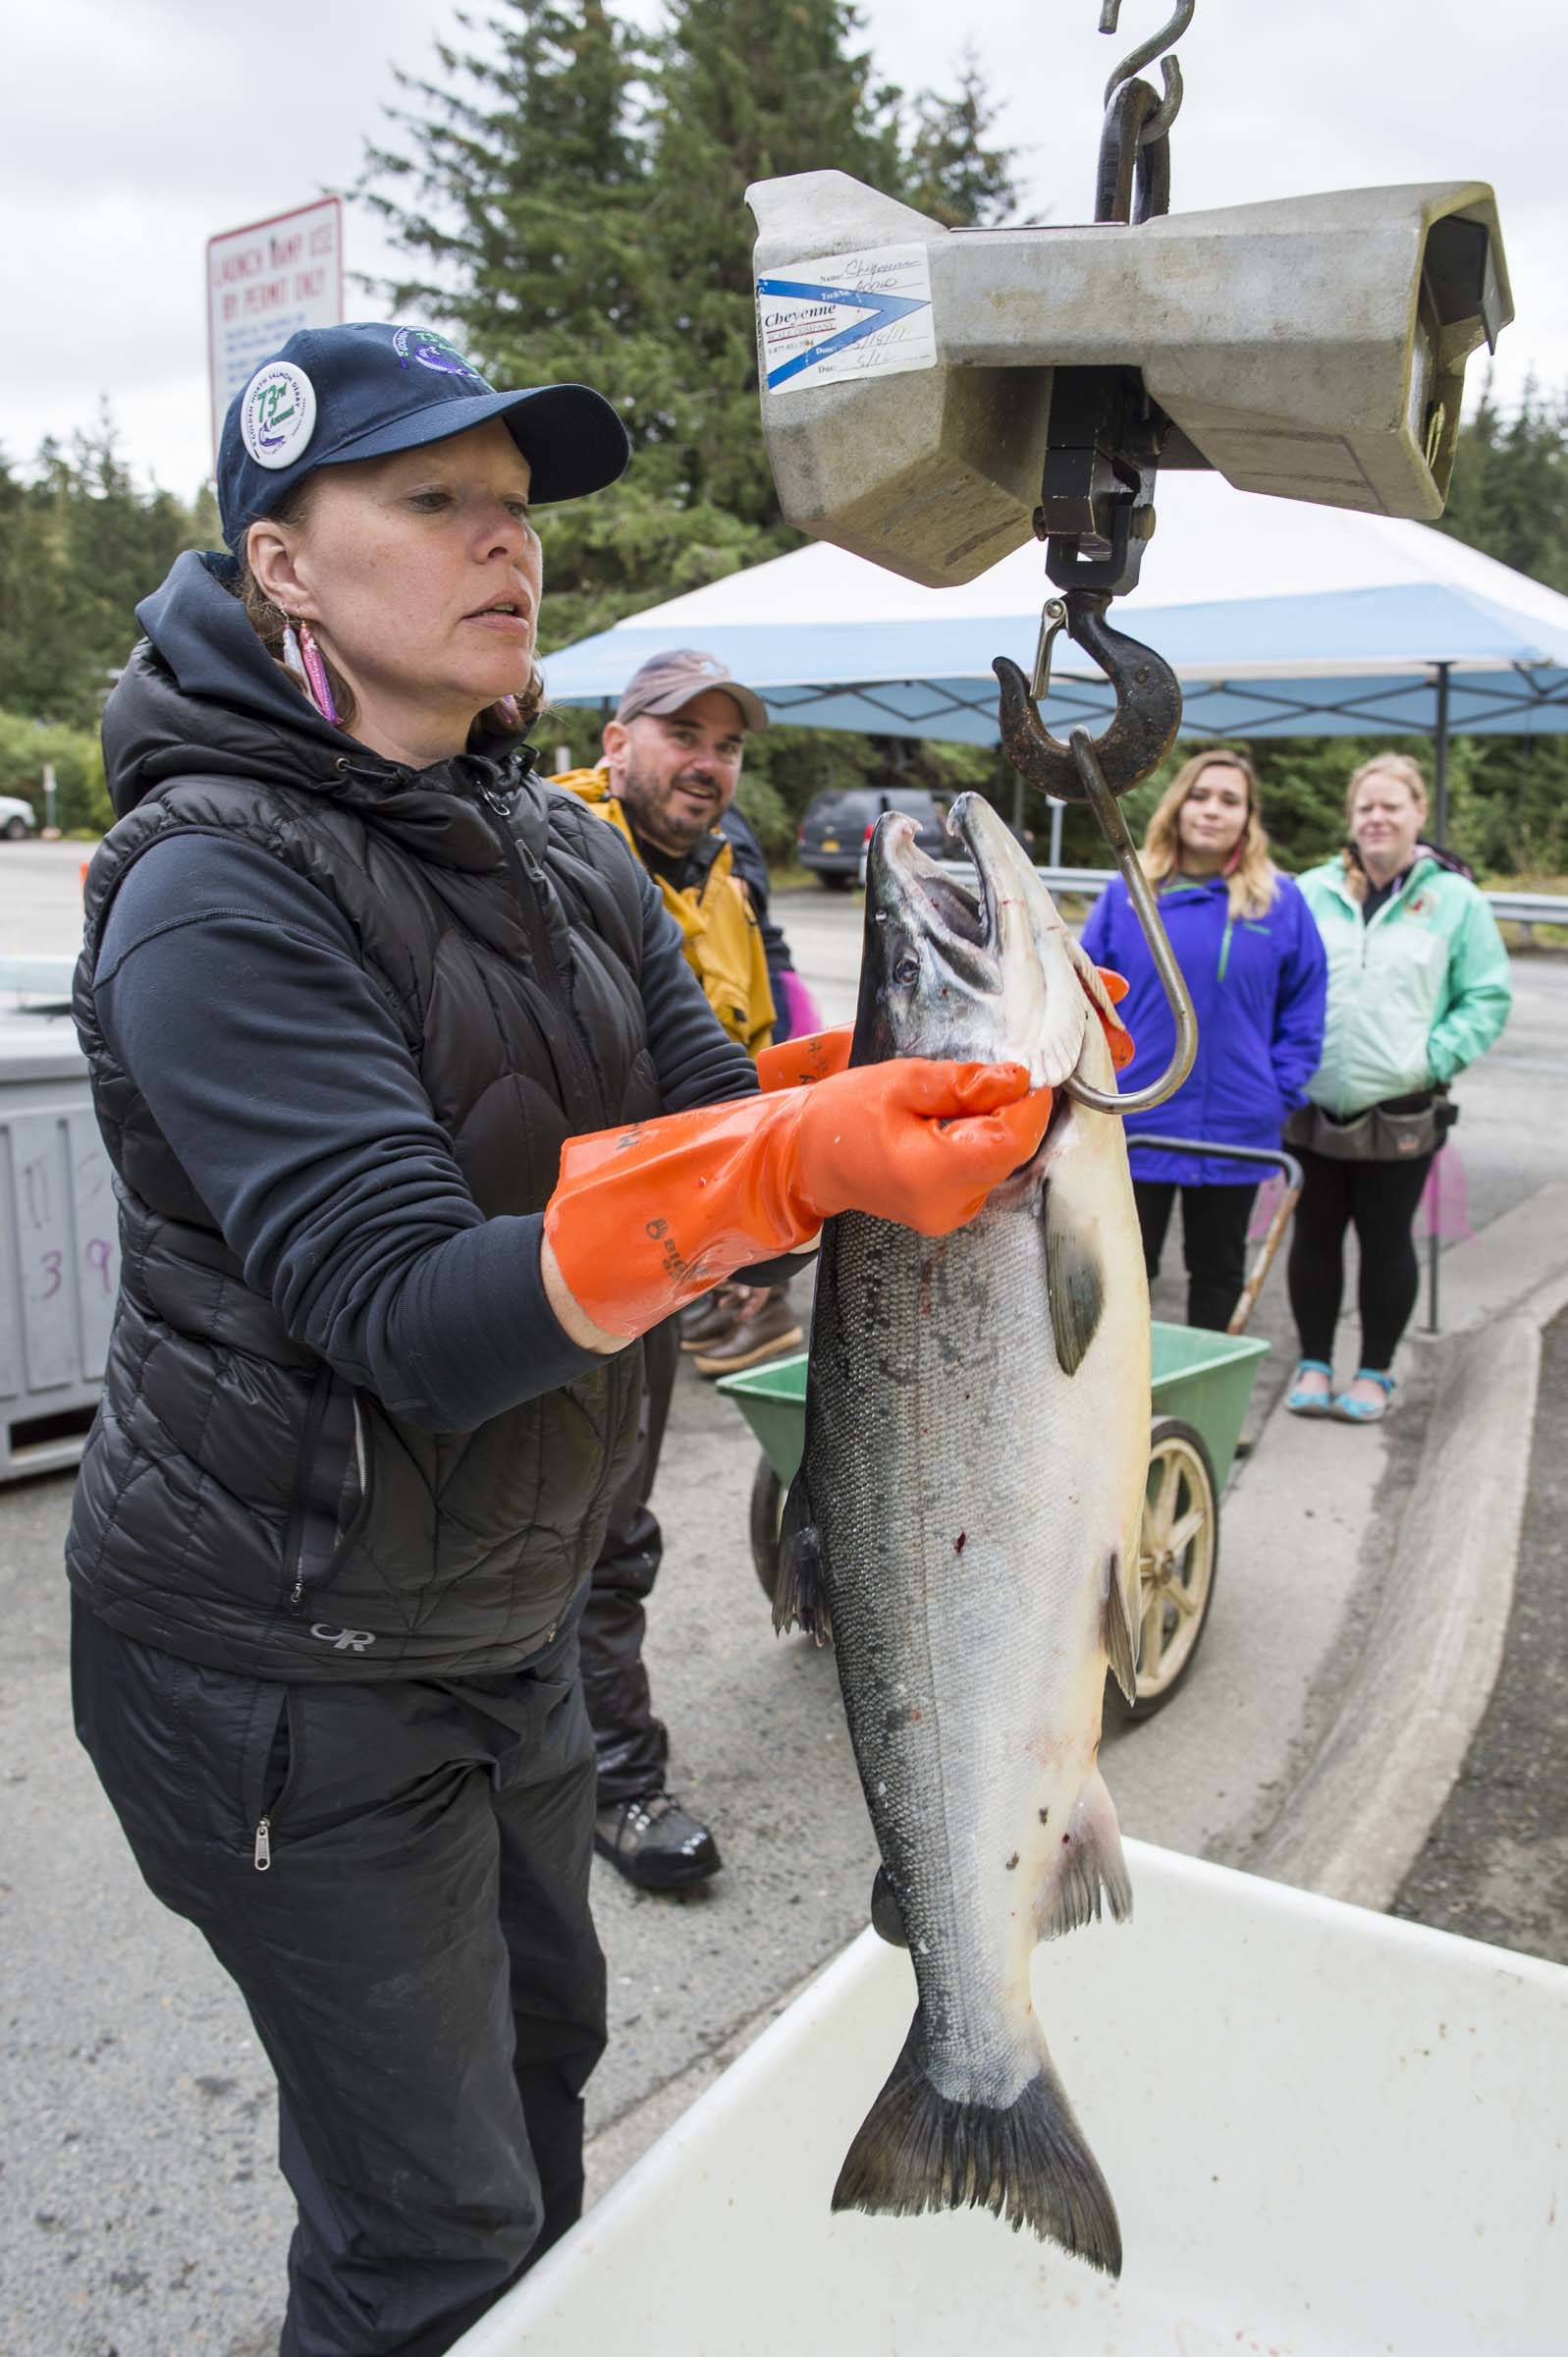 Volunteer Misty Smith weighs a coho turned in by John Bohan at the Golden North Salmon Derby’s station at Amalga Harbor on Saturday, Aug. 24, 2019. (Michael Penn | Juneau Empire)